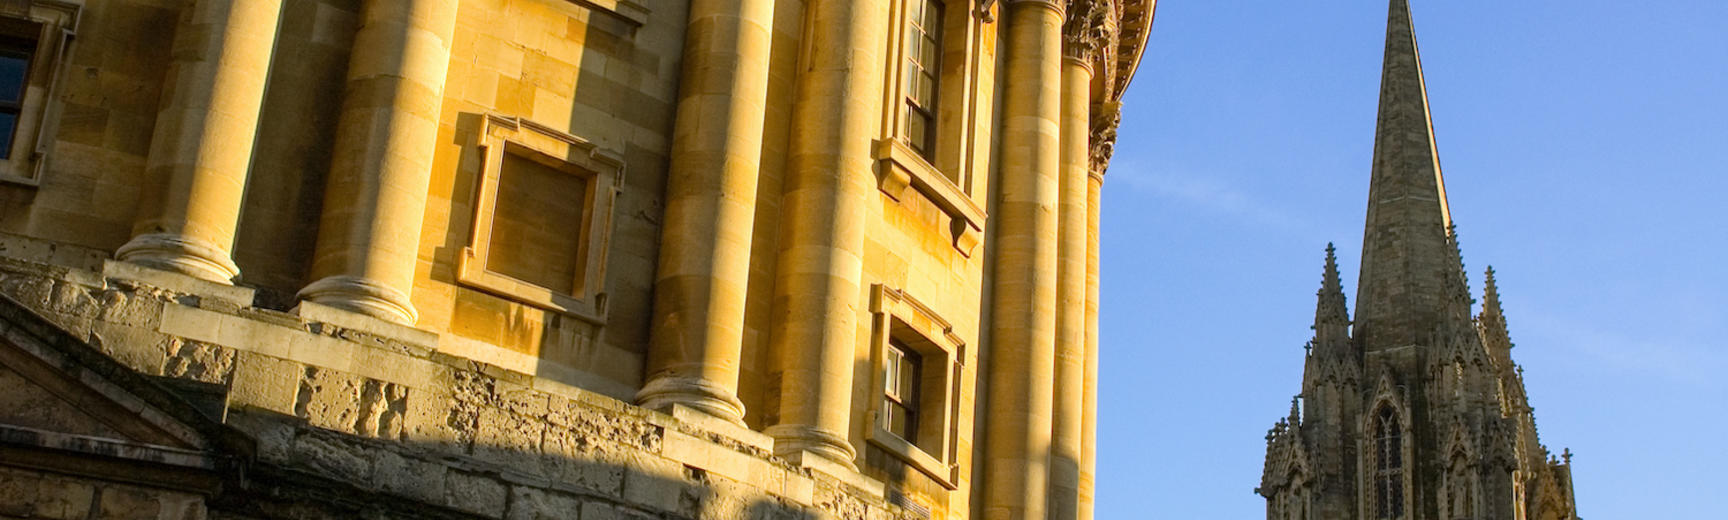 Detail of Radcliffe Camera, Oxford